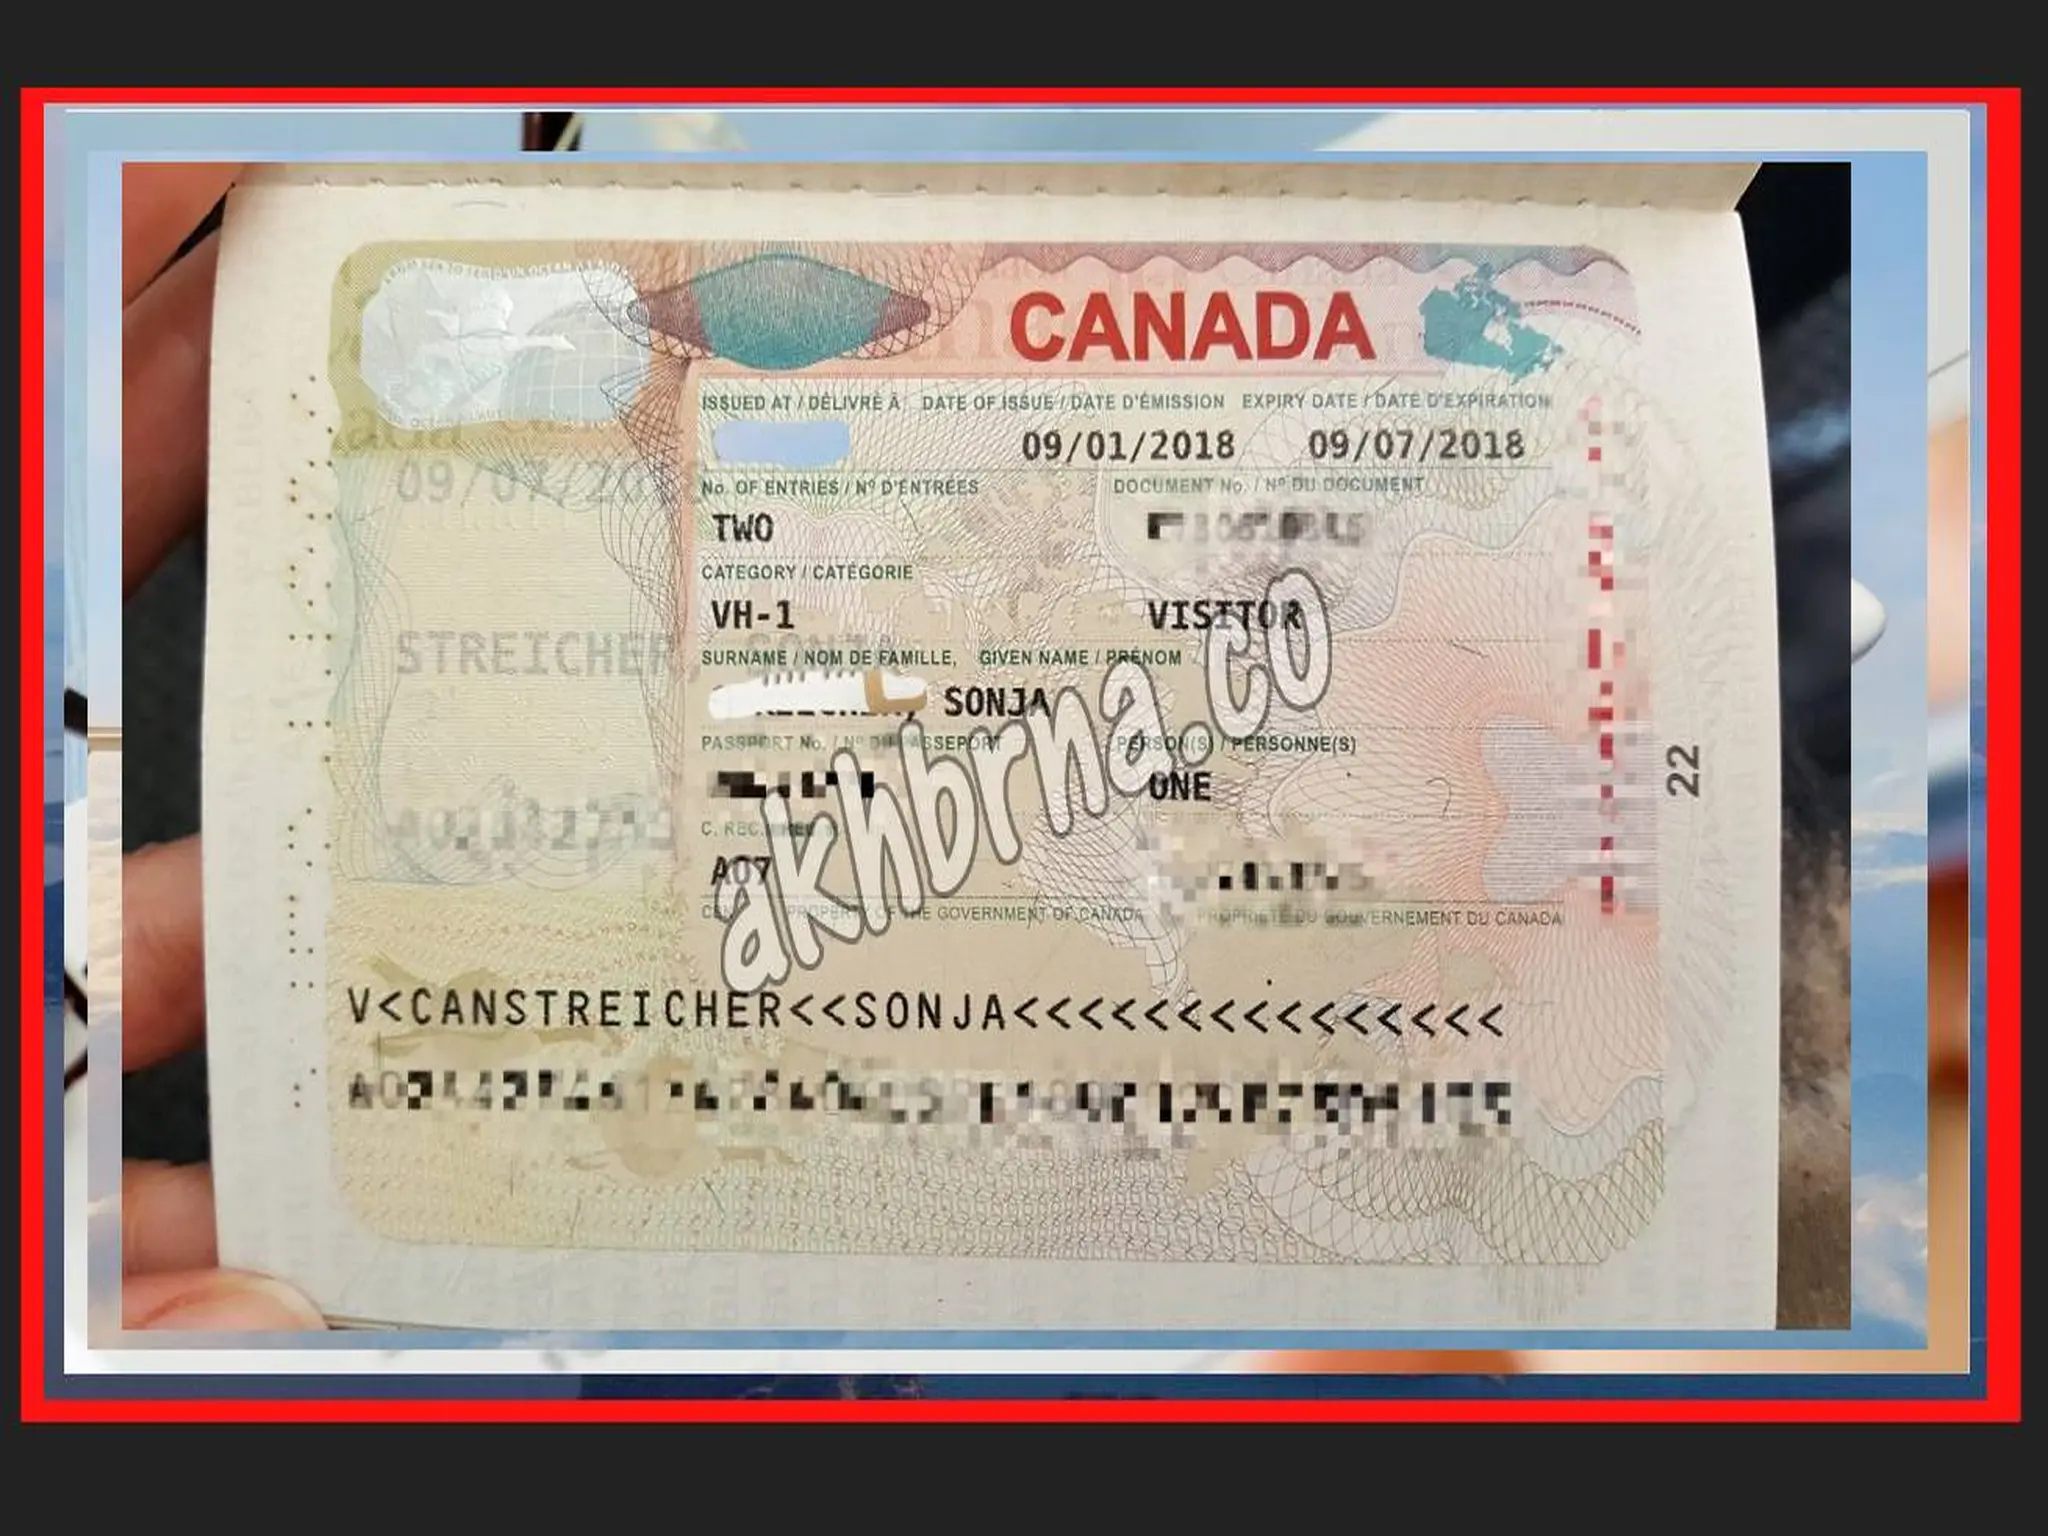 How to Obtain a Transit Visa to Canada